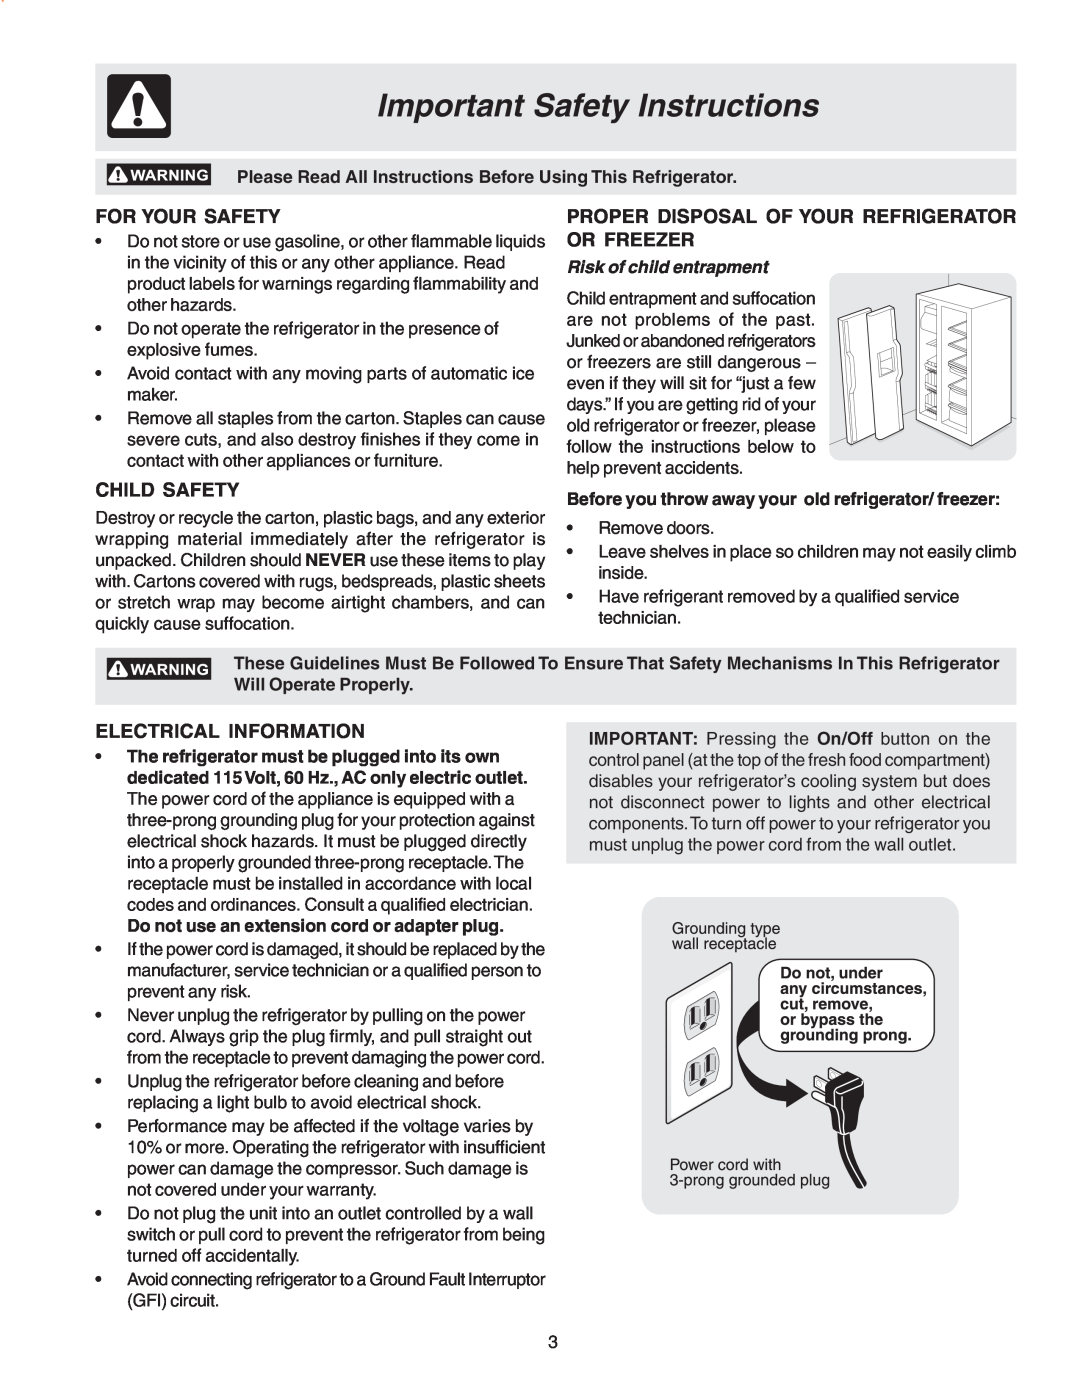 Frigidaire Compact Refrigerator manual Important Safety Instructions, For Your Safety, Child Safety, Electrical Information 